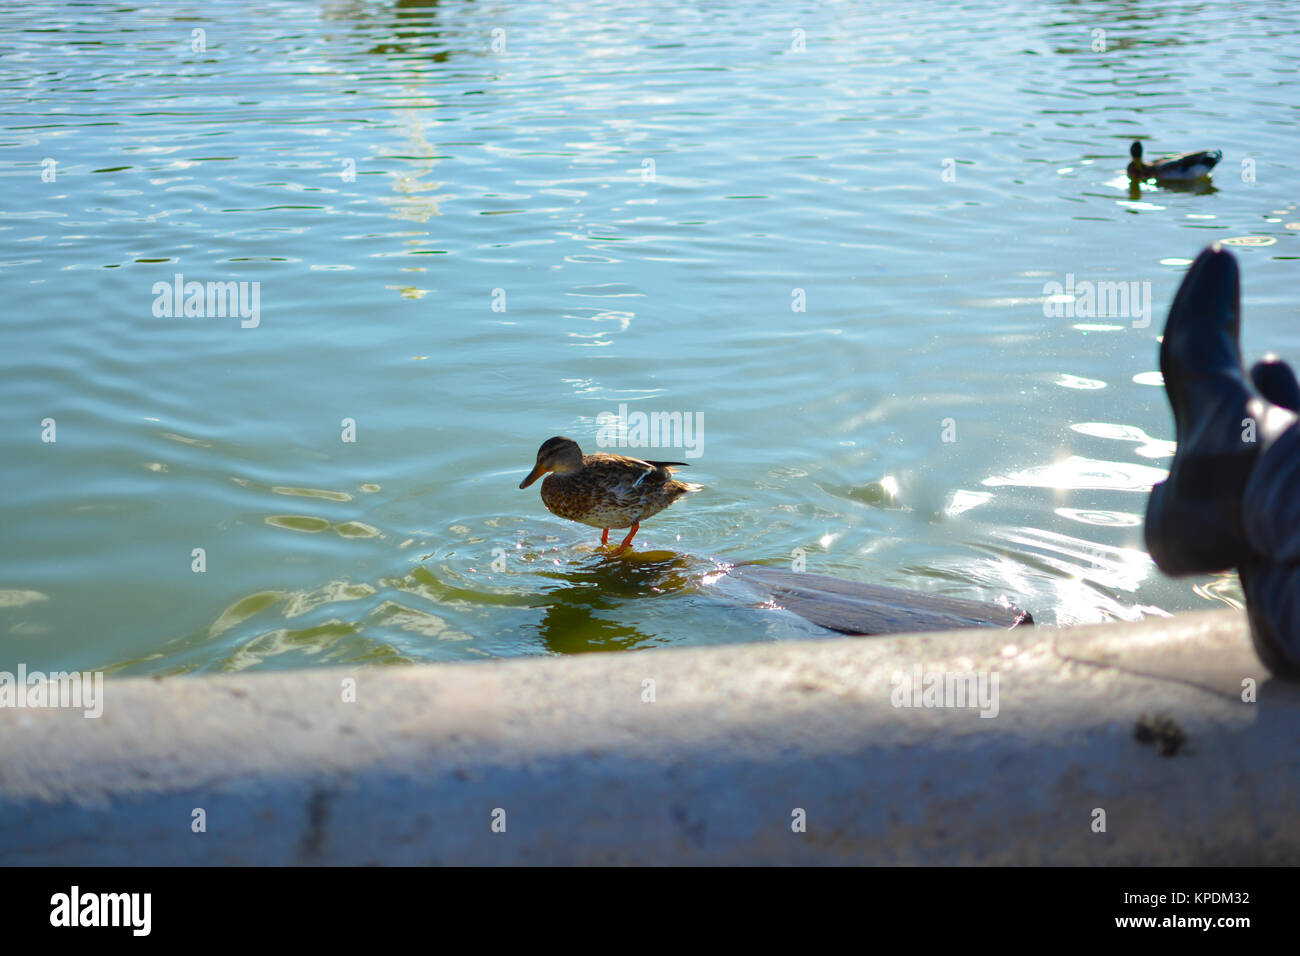 A man relaxes with feet up as he watches a duck balancing on a floating wooden board in the grand bassin rond at the Tuileries Garden in Paris France Stock Photo